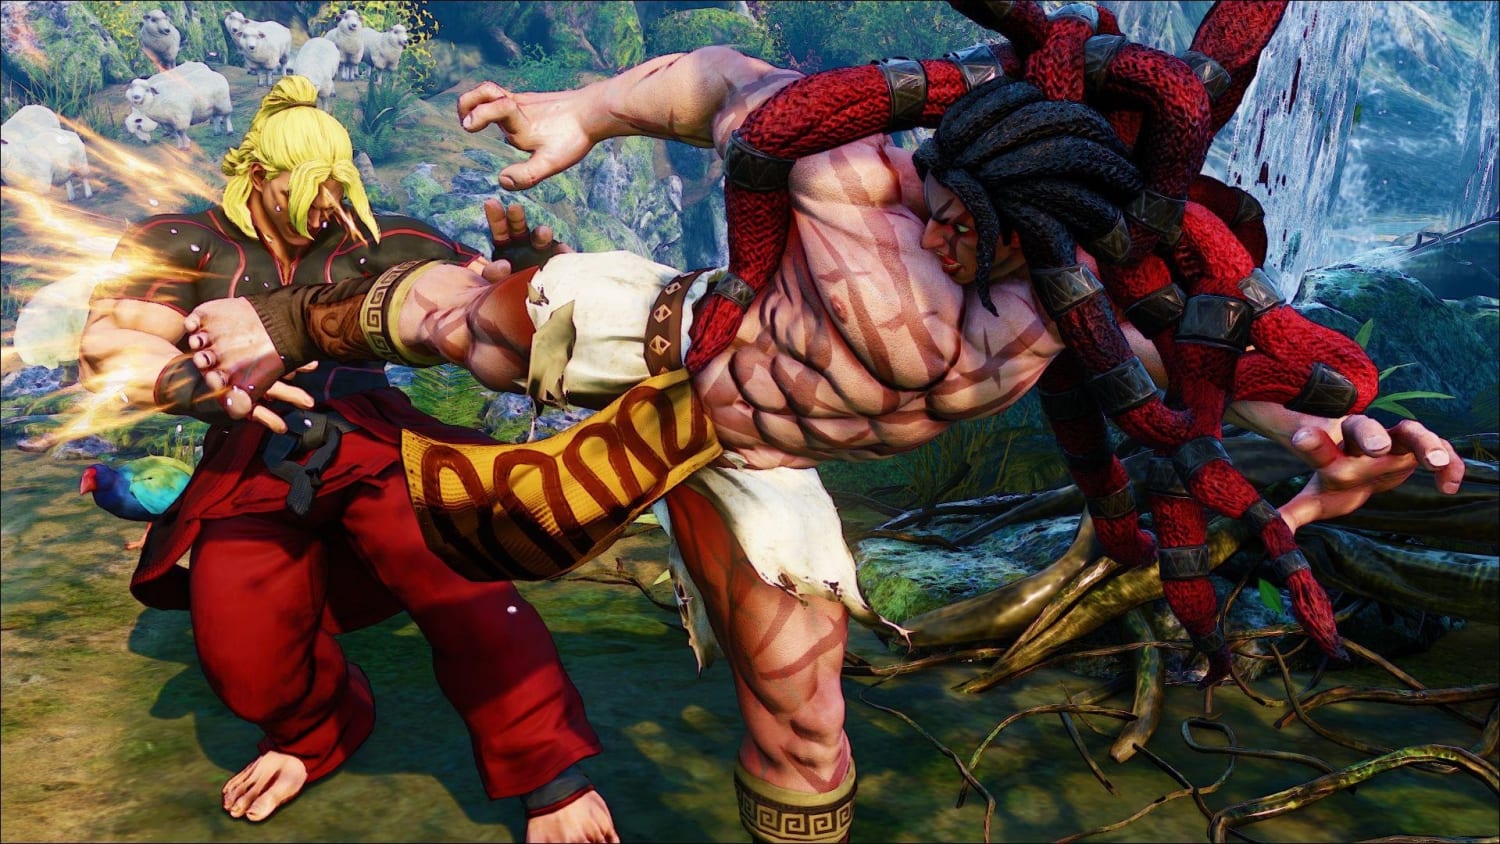 Street Fighter 5 input latency put to the test between PlayStation 5 and PS4